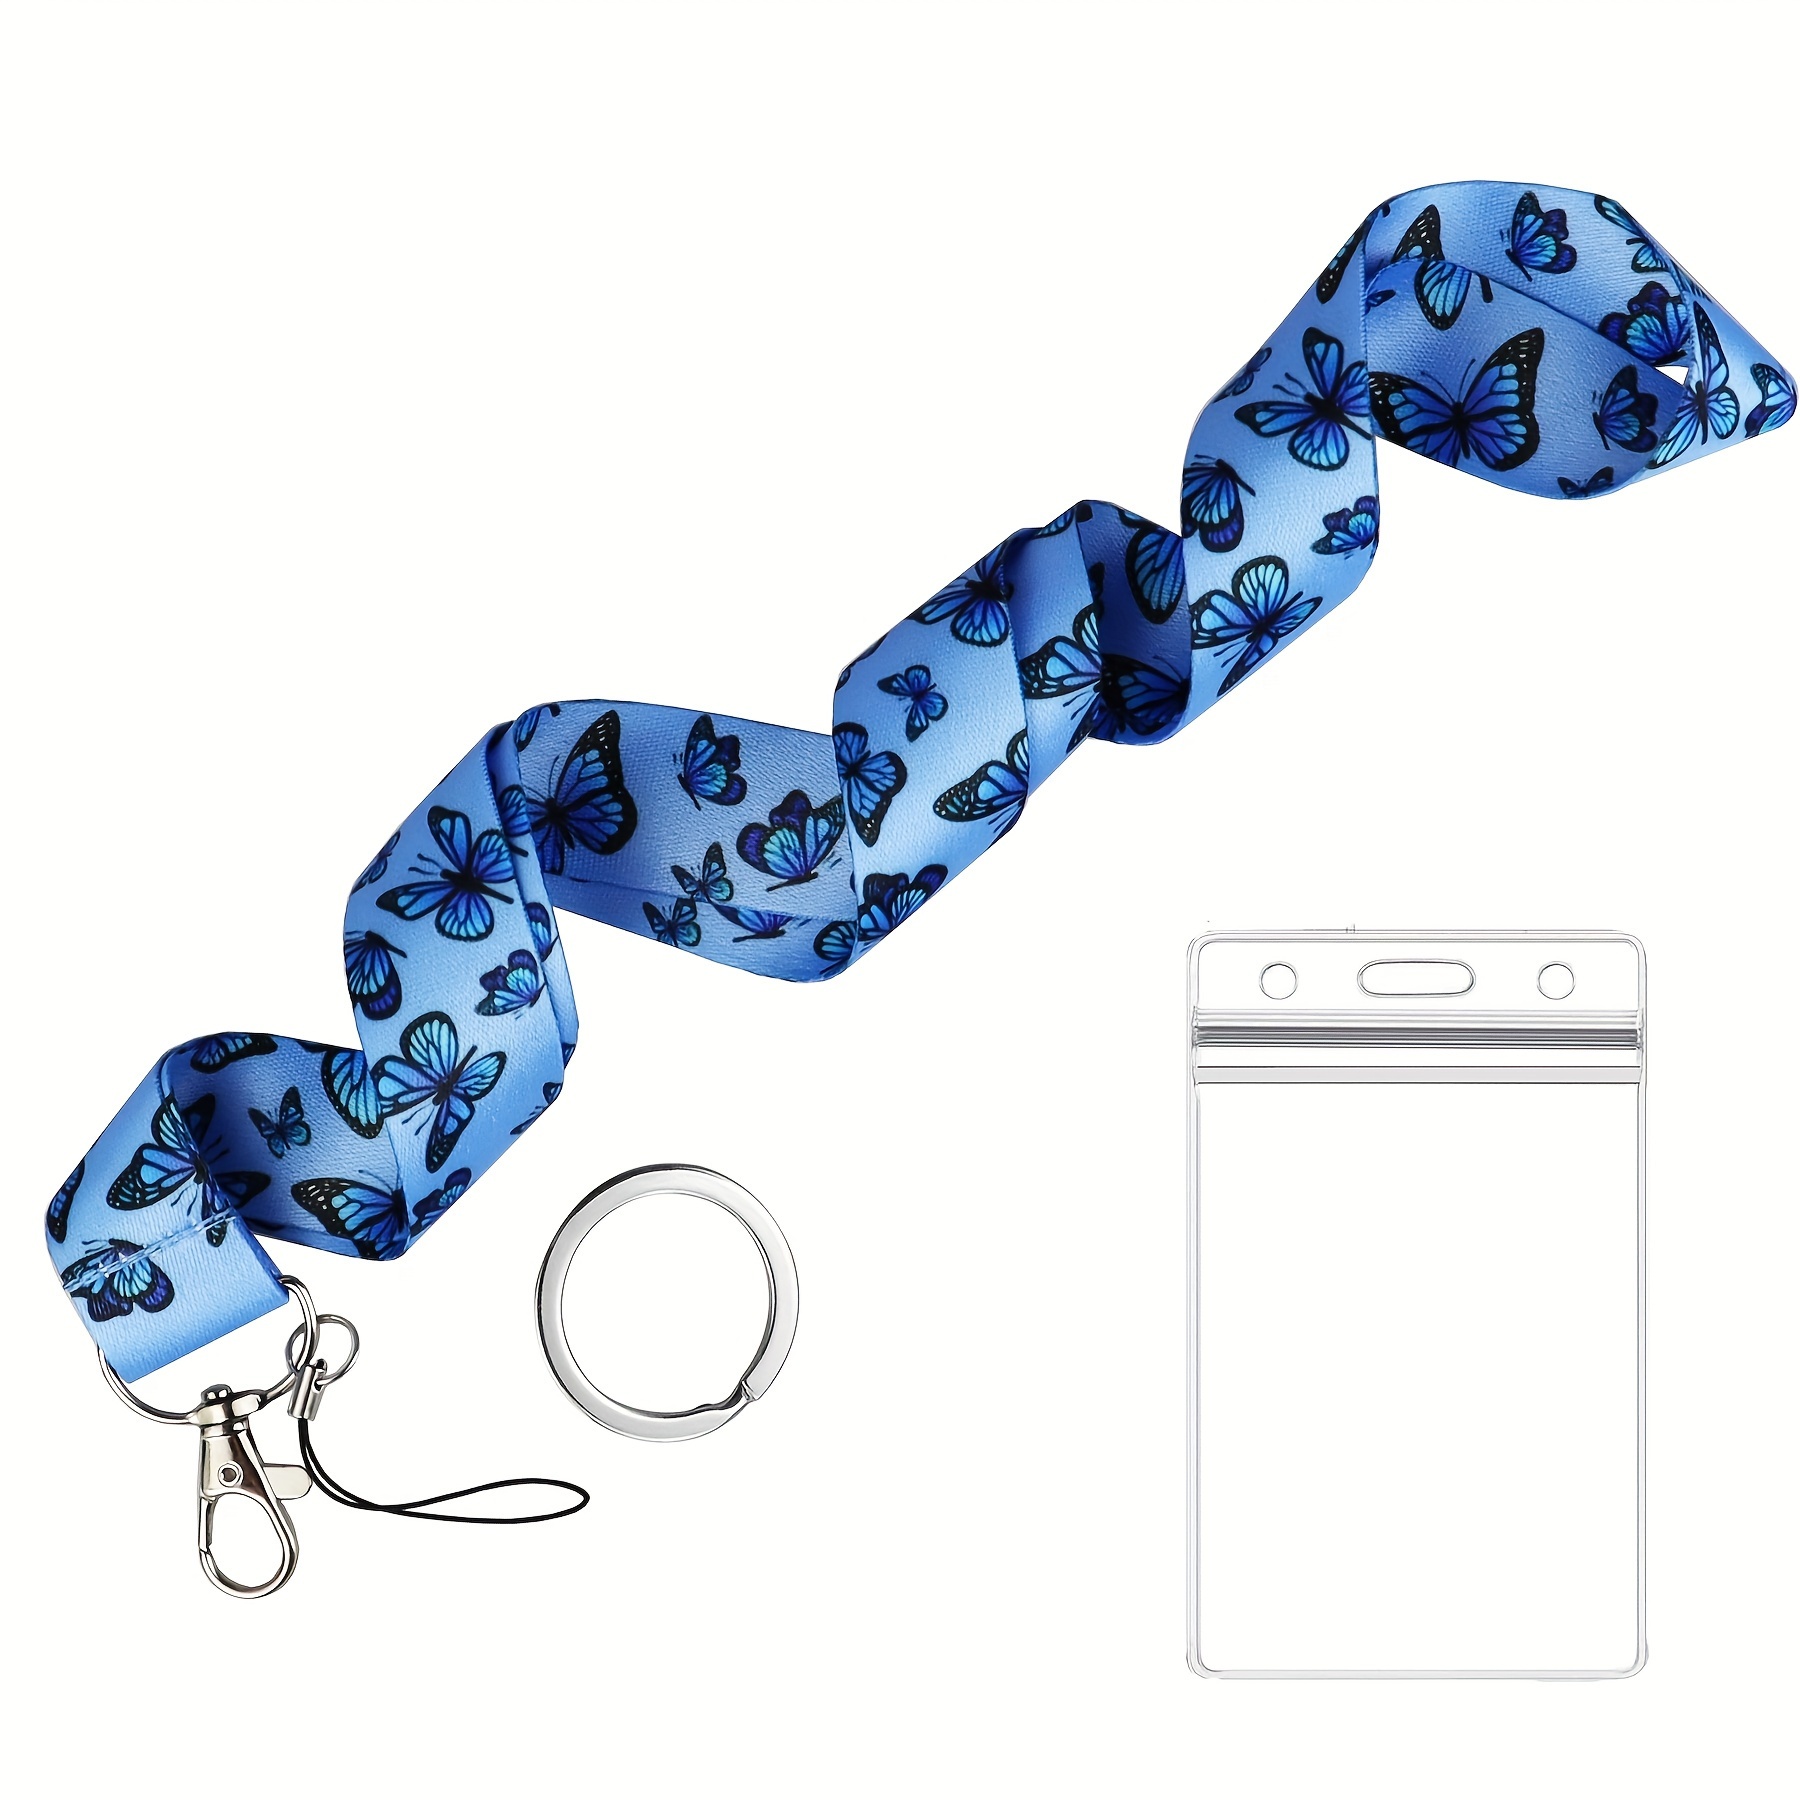 1pc * Neck Lanyard With ID Badge Holder For Keys Keychain, Blue Monarch  Butterfly Teacher Lanyard With Clear Plastic ID Card Holder Phone Lanyard